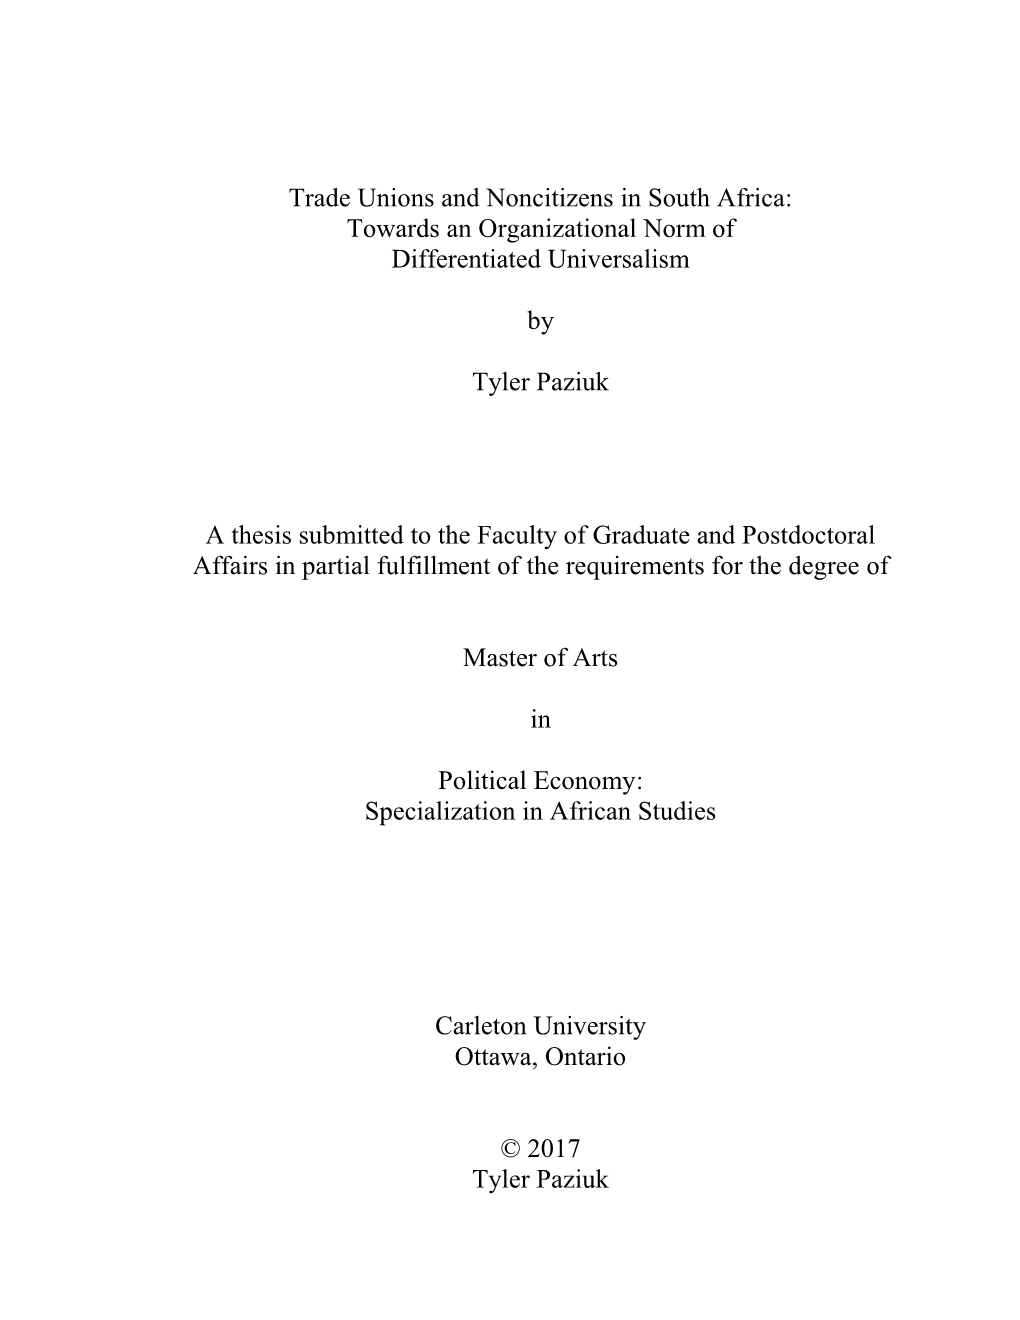 Trade Unions and Noncitizens in South Africa: Towards an Organizational Norm of Differentiated Universalism